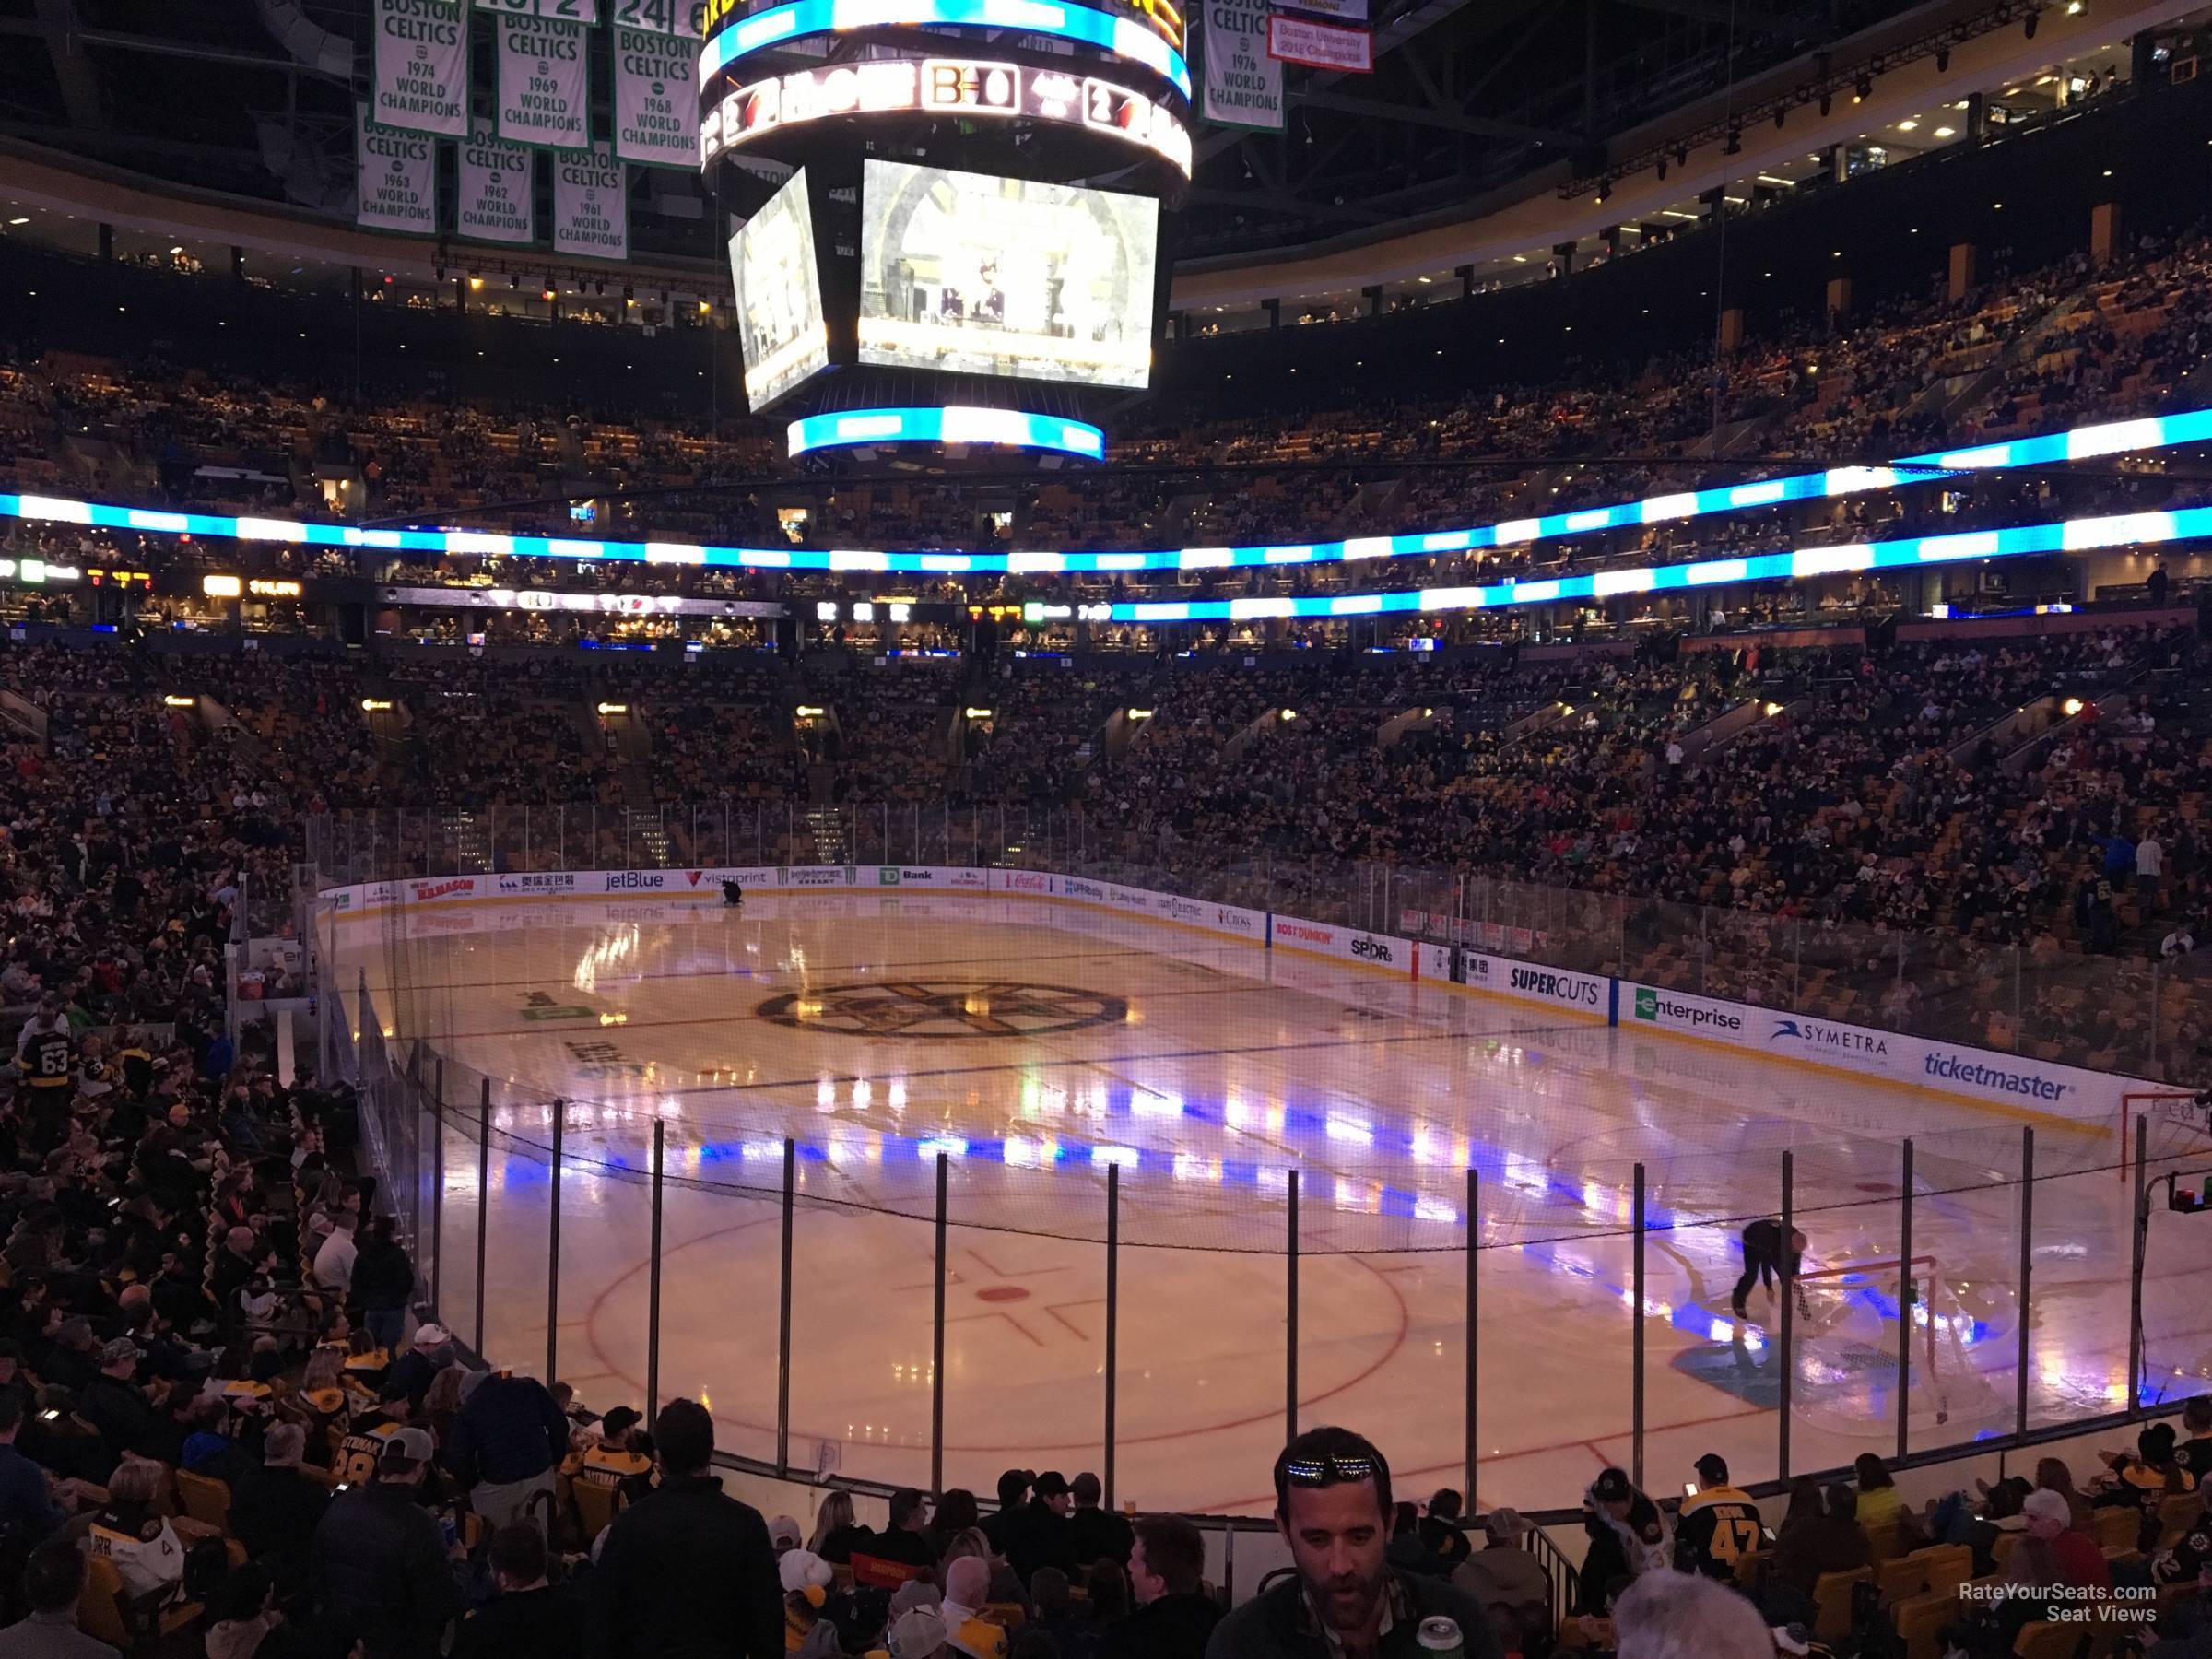 loge 19, row 15 seat view  for hockey - td garden